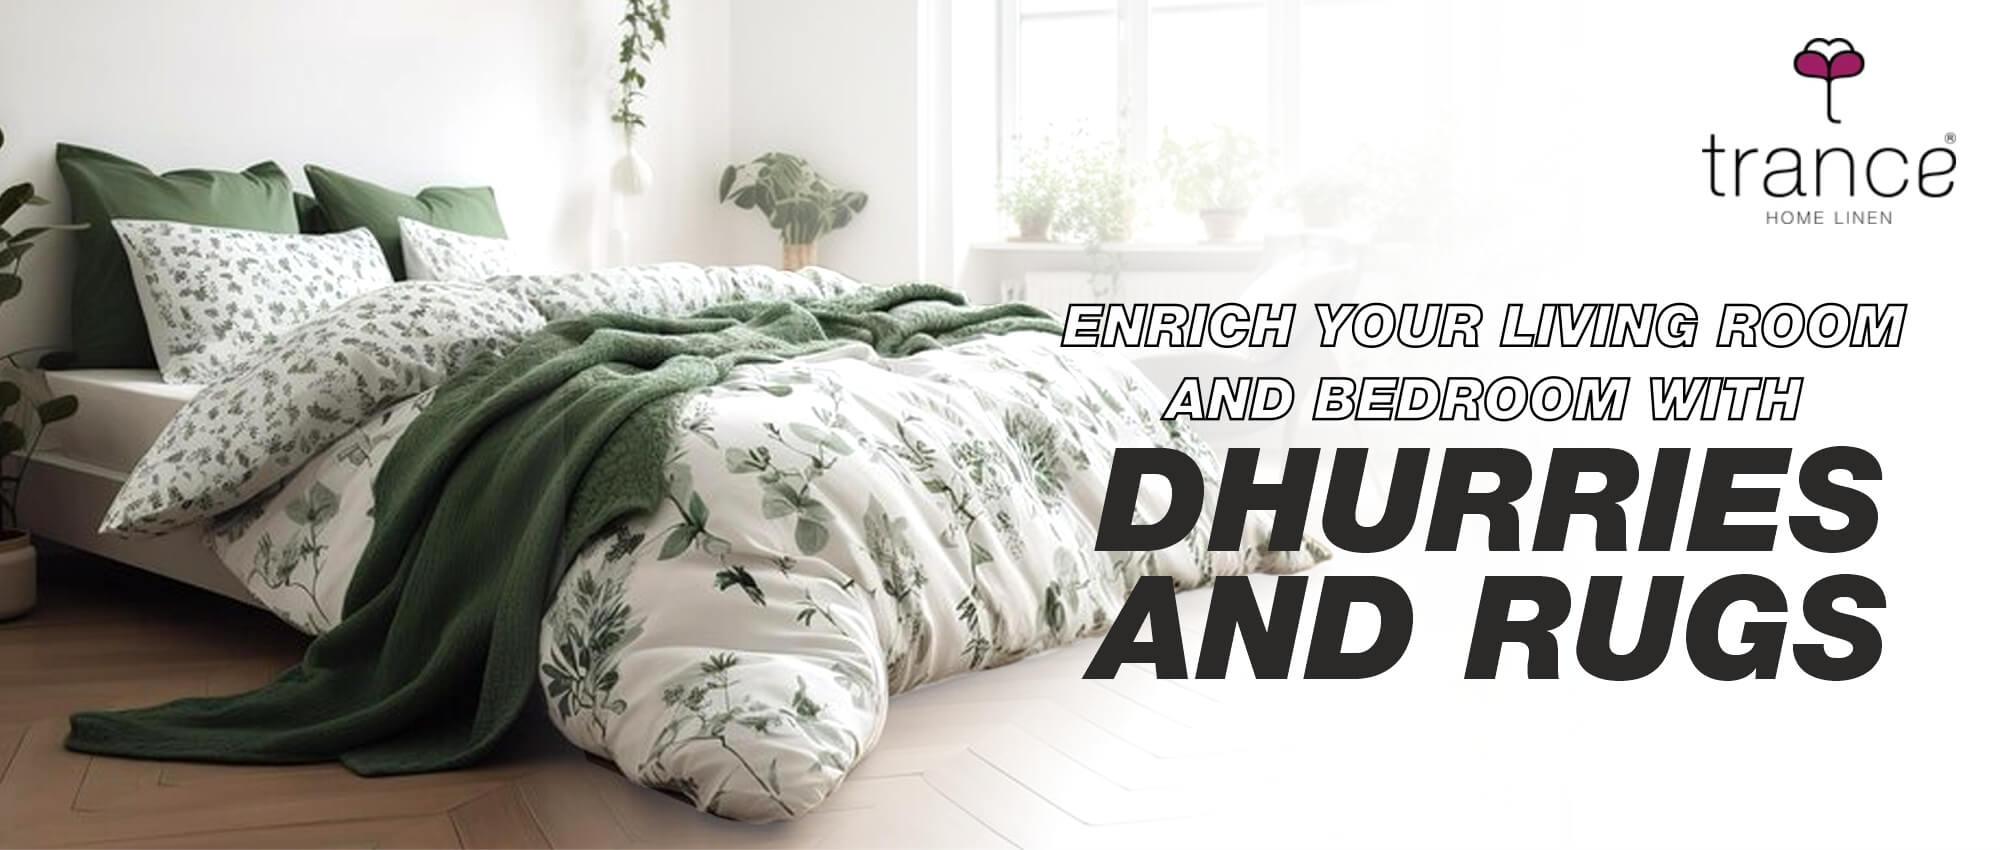 Dhurries-and-rugs